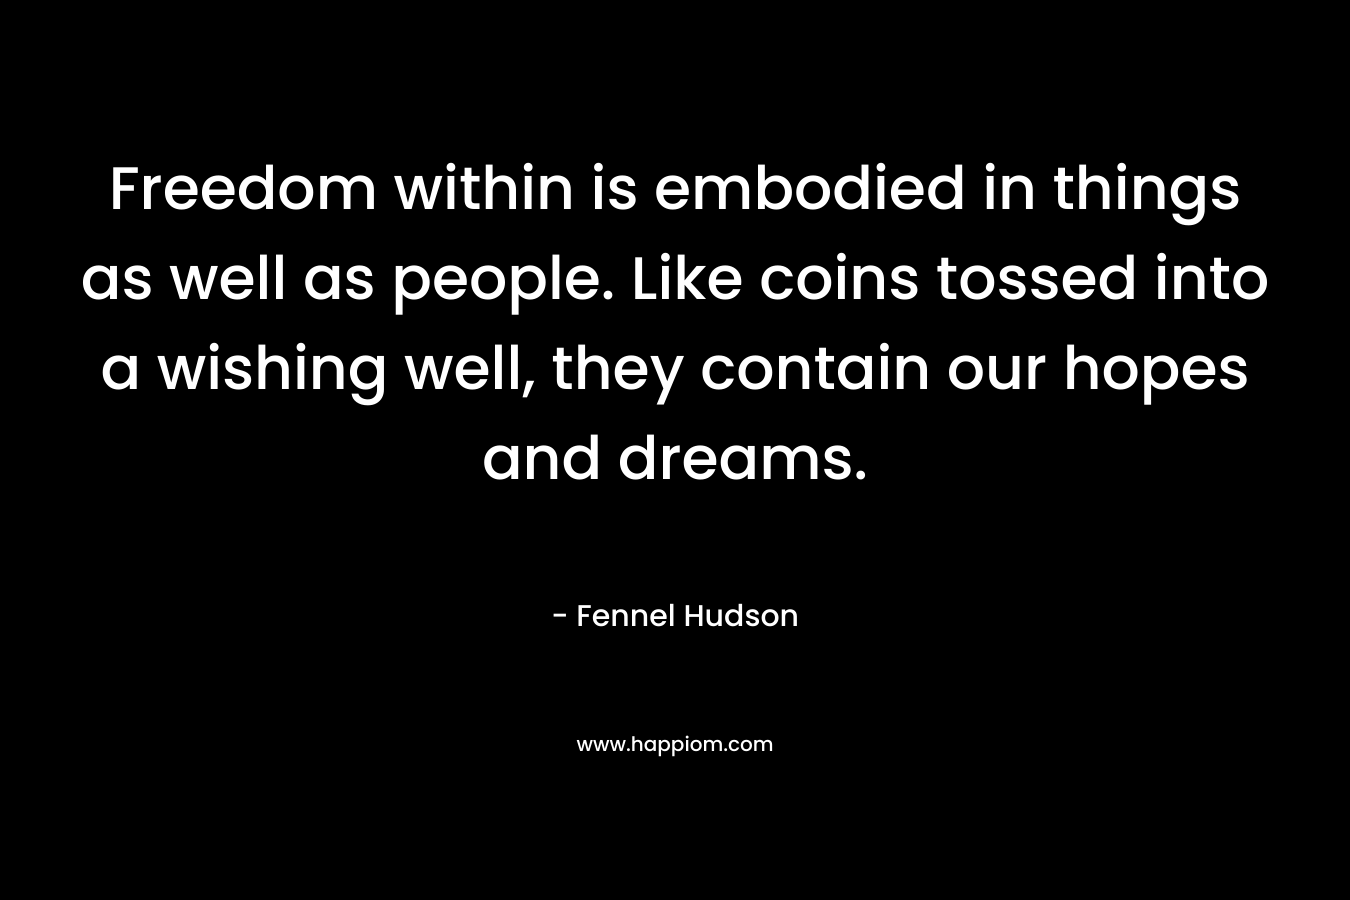 Freedom within is embodied in things as well as people. Like coins tossed into a wishing well, they contain our hopes and dreams.